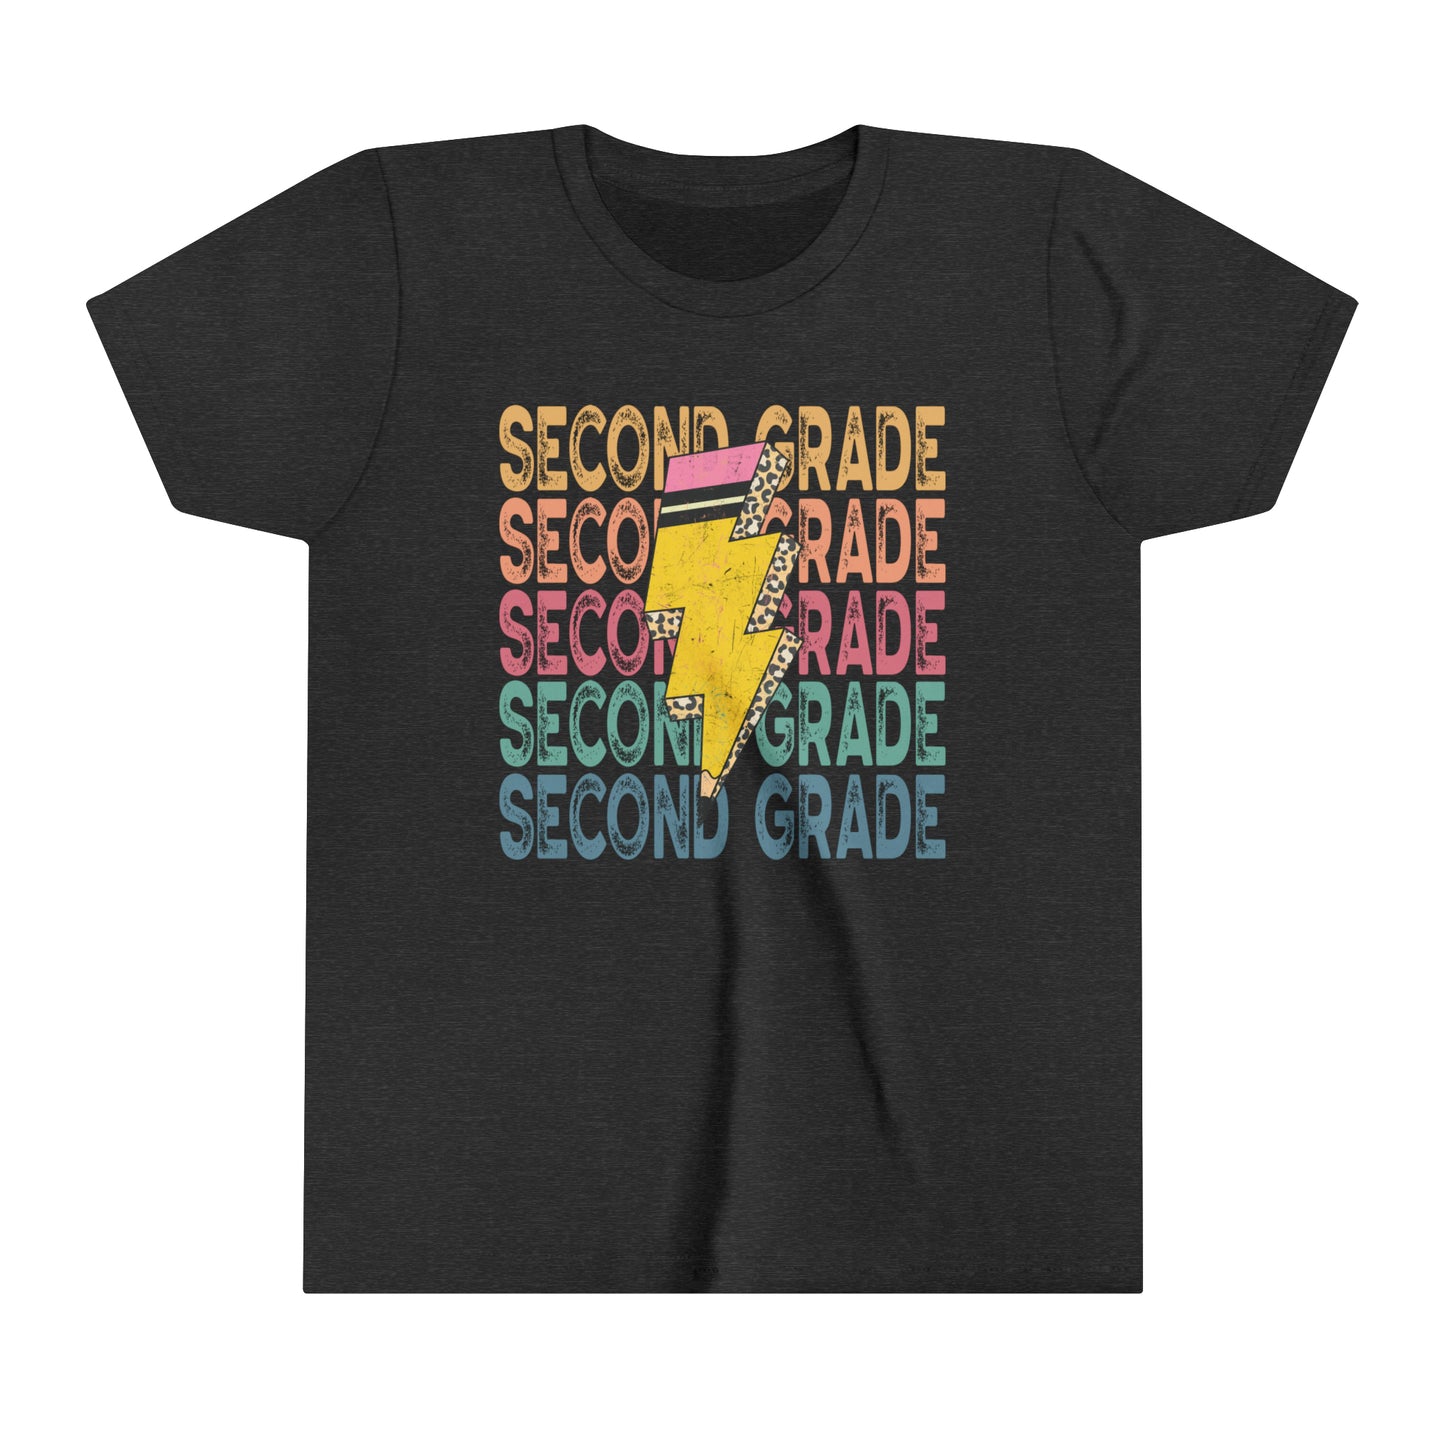 Second Grade Girl's Youth Short Sleeve Tee